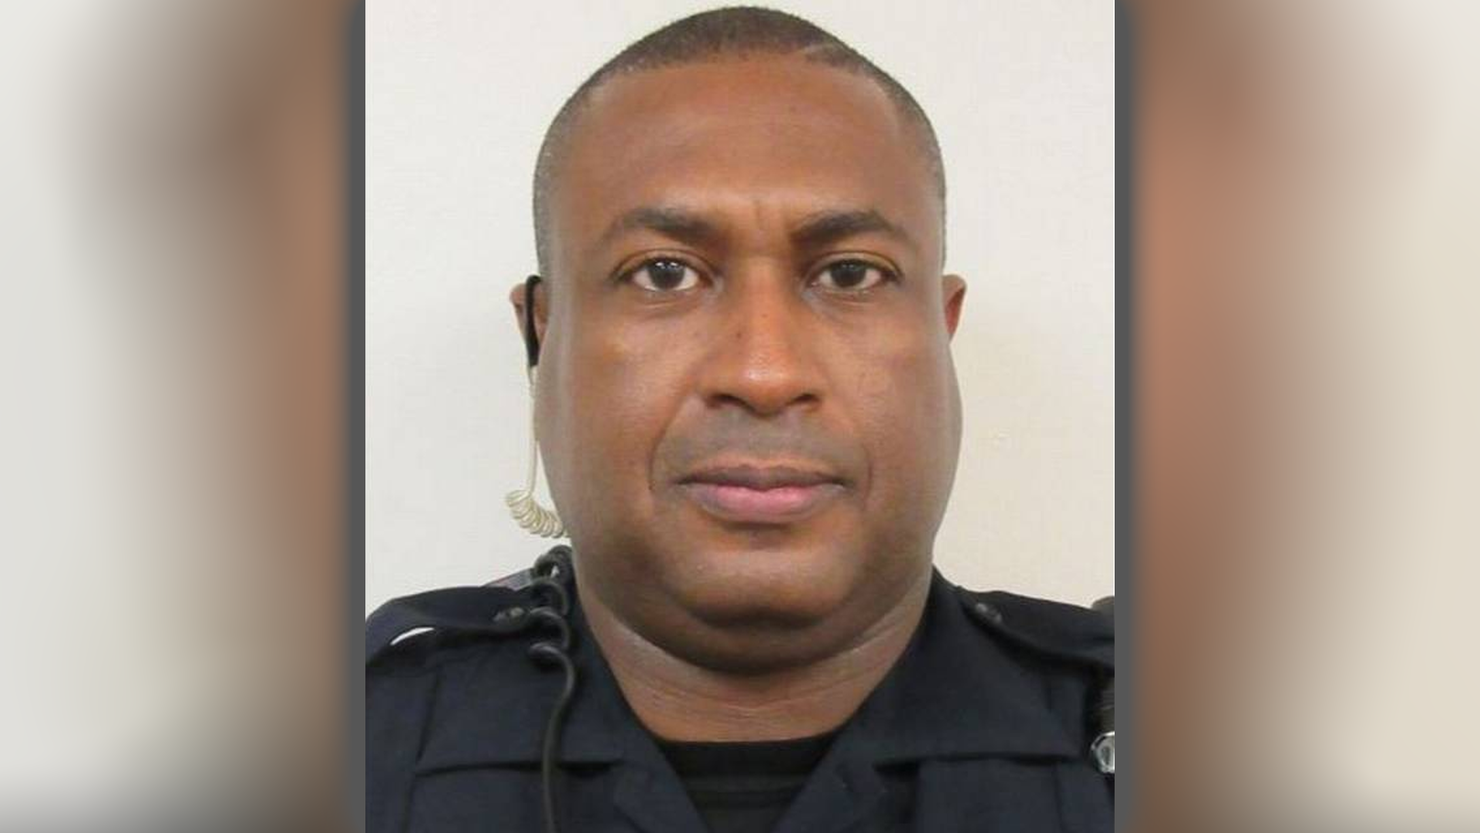 Texas cop arrested after allegedly strip searching 6 women in 11 days